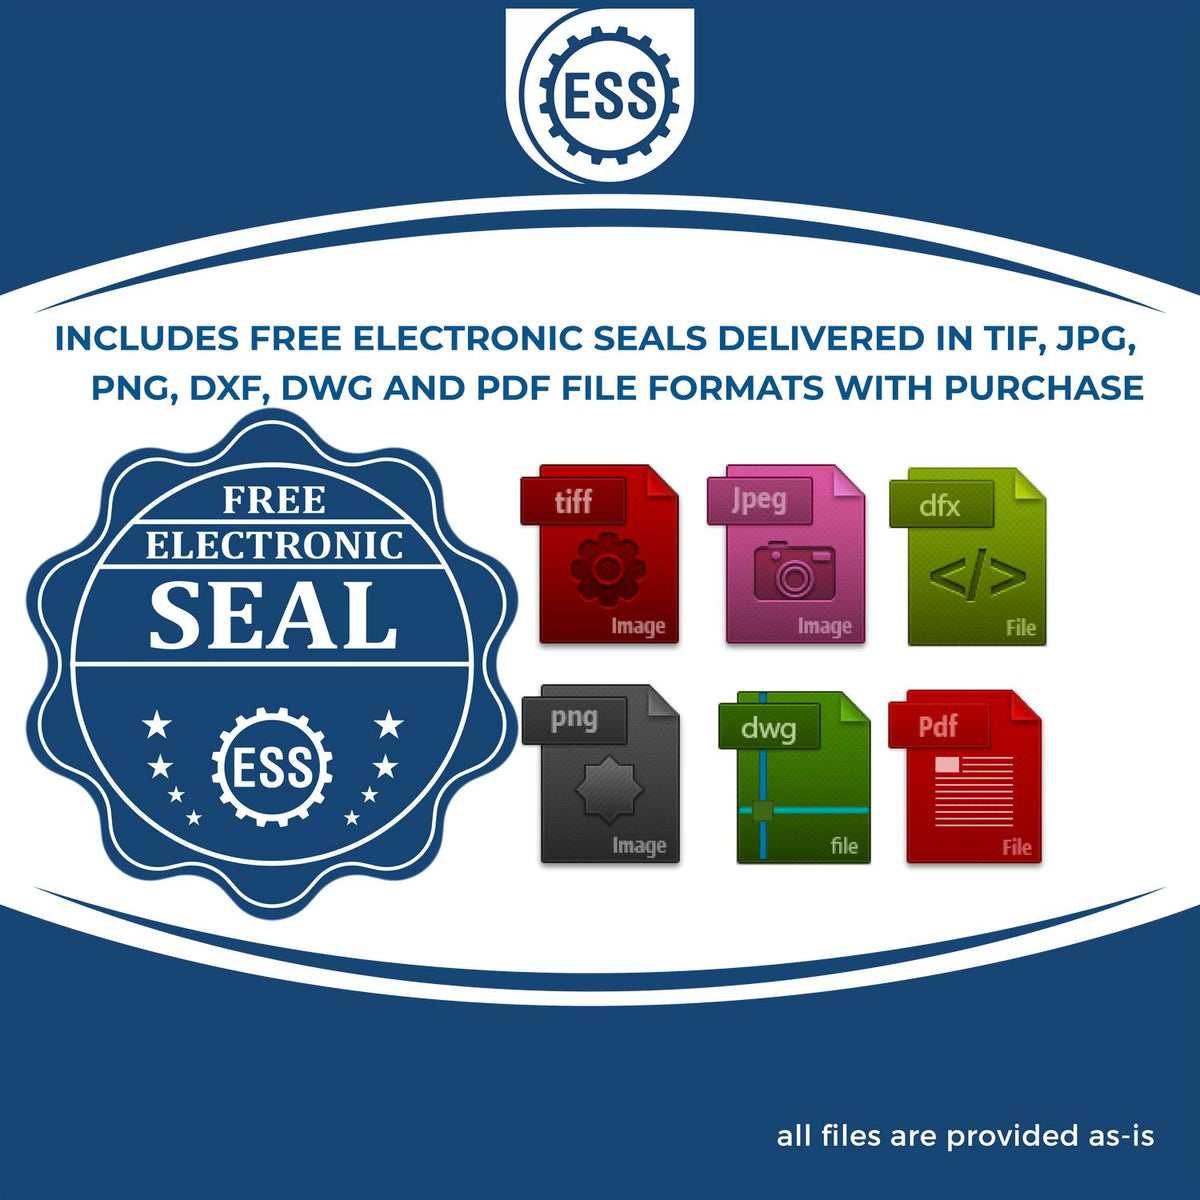 An infographic for the free electronic seal for the Gift South Dakota Land Surveyor Seal illustrating the different file type icons such as DXF, DWG, TIF, JPG and PNG.